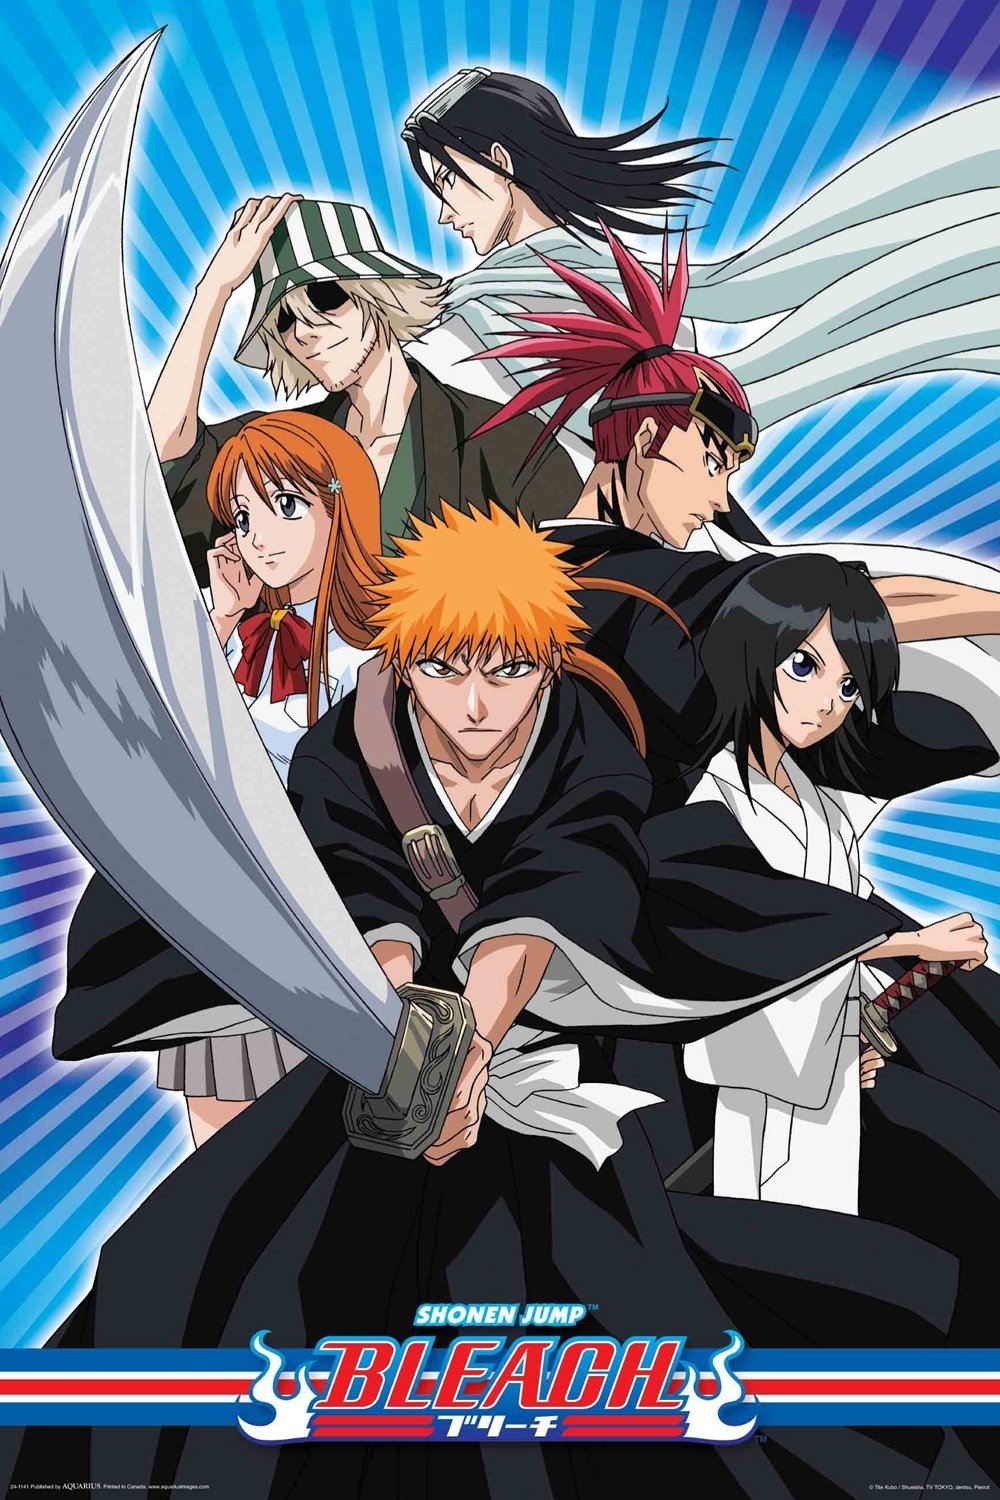 Bleach Characters, Ending, Plot: Explained - The Cinemaholic